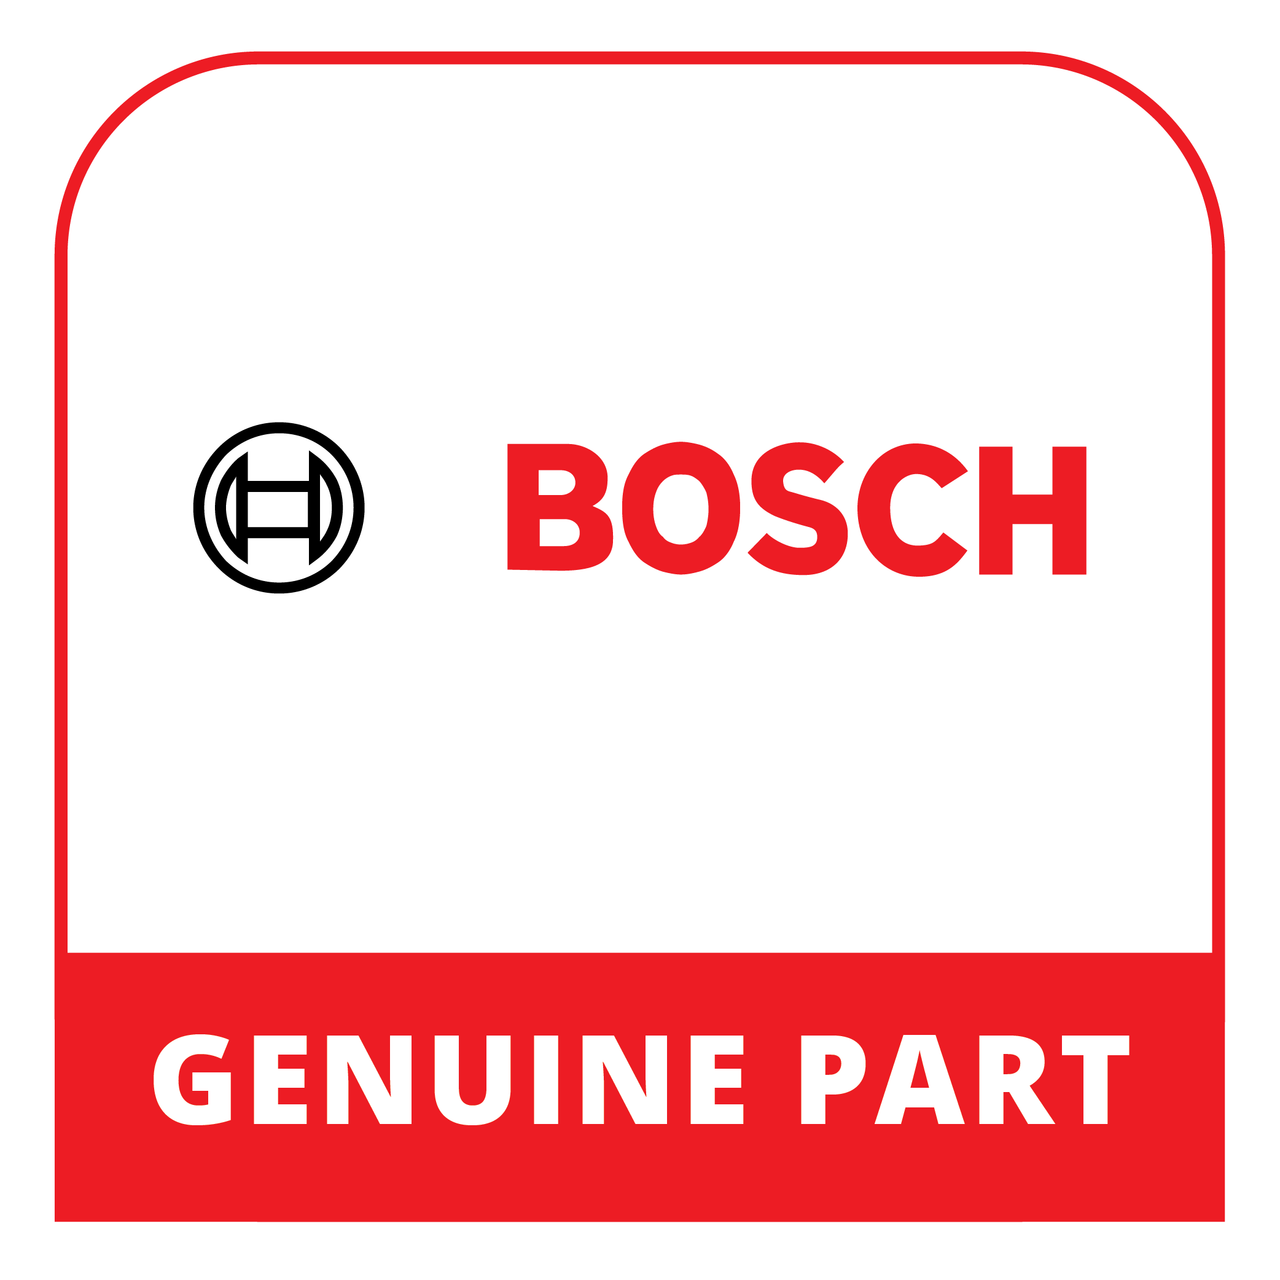 Bosch (Thermador) 00779041 - Cover Sheet - Genuine Bosch (Thermador) Part